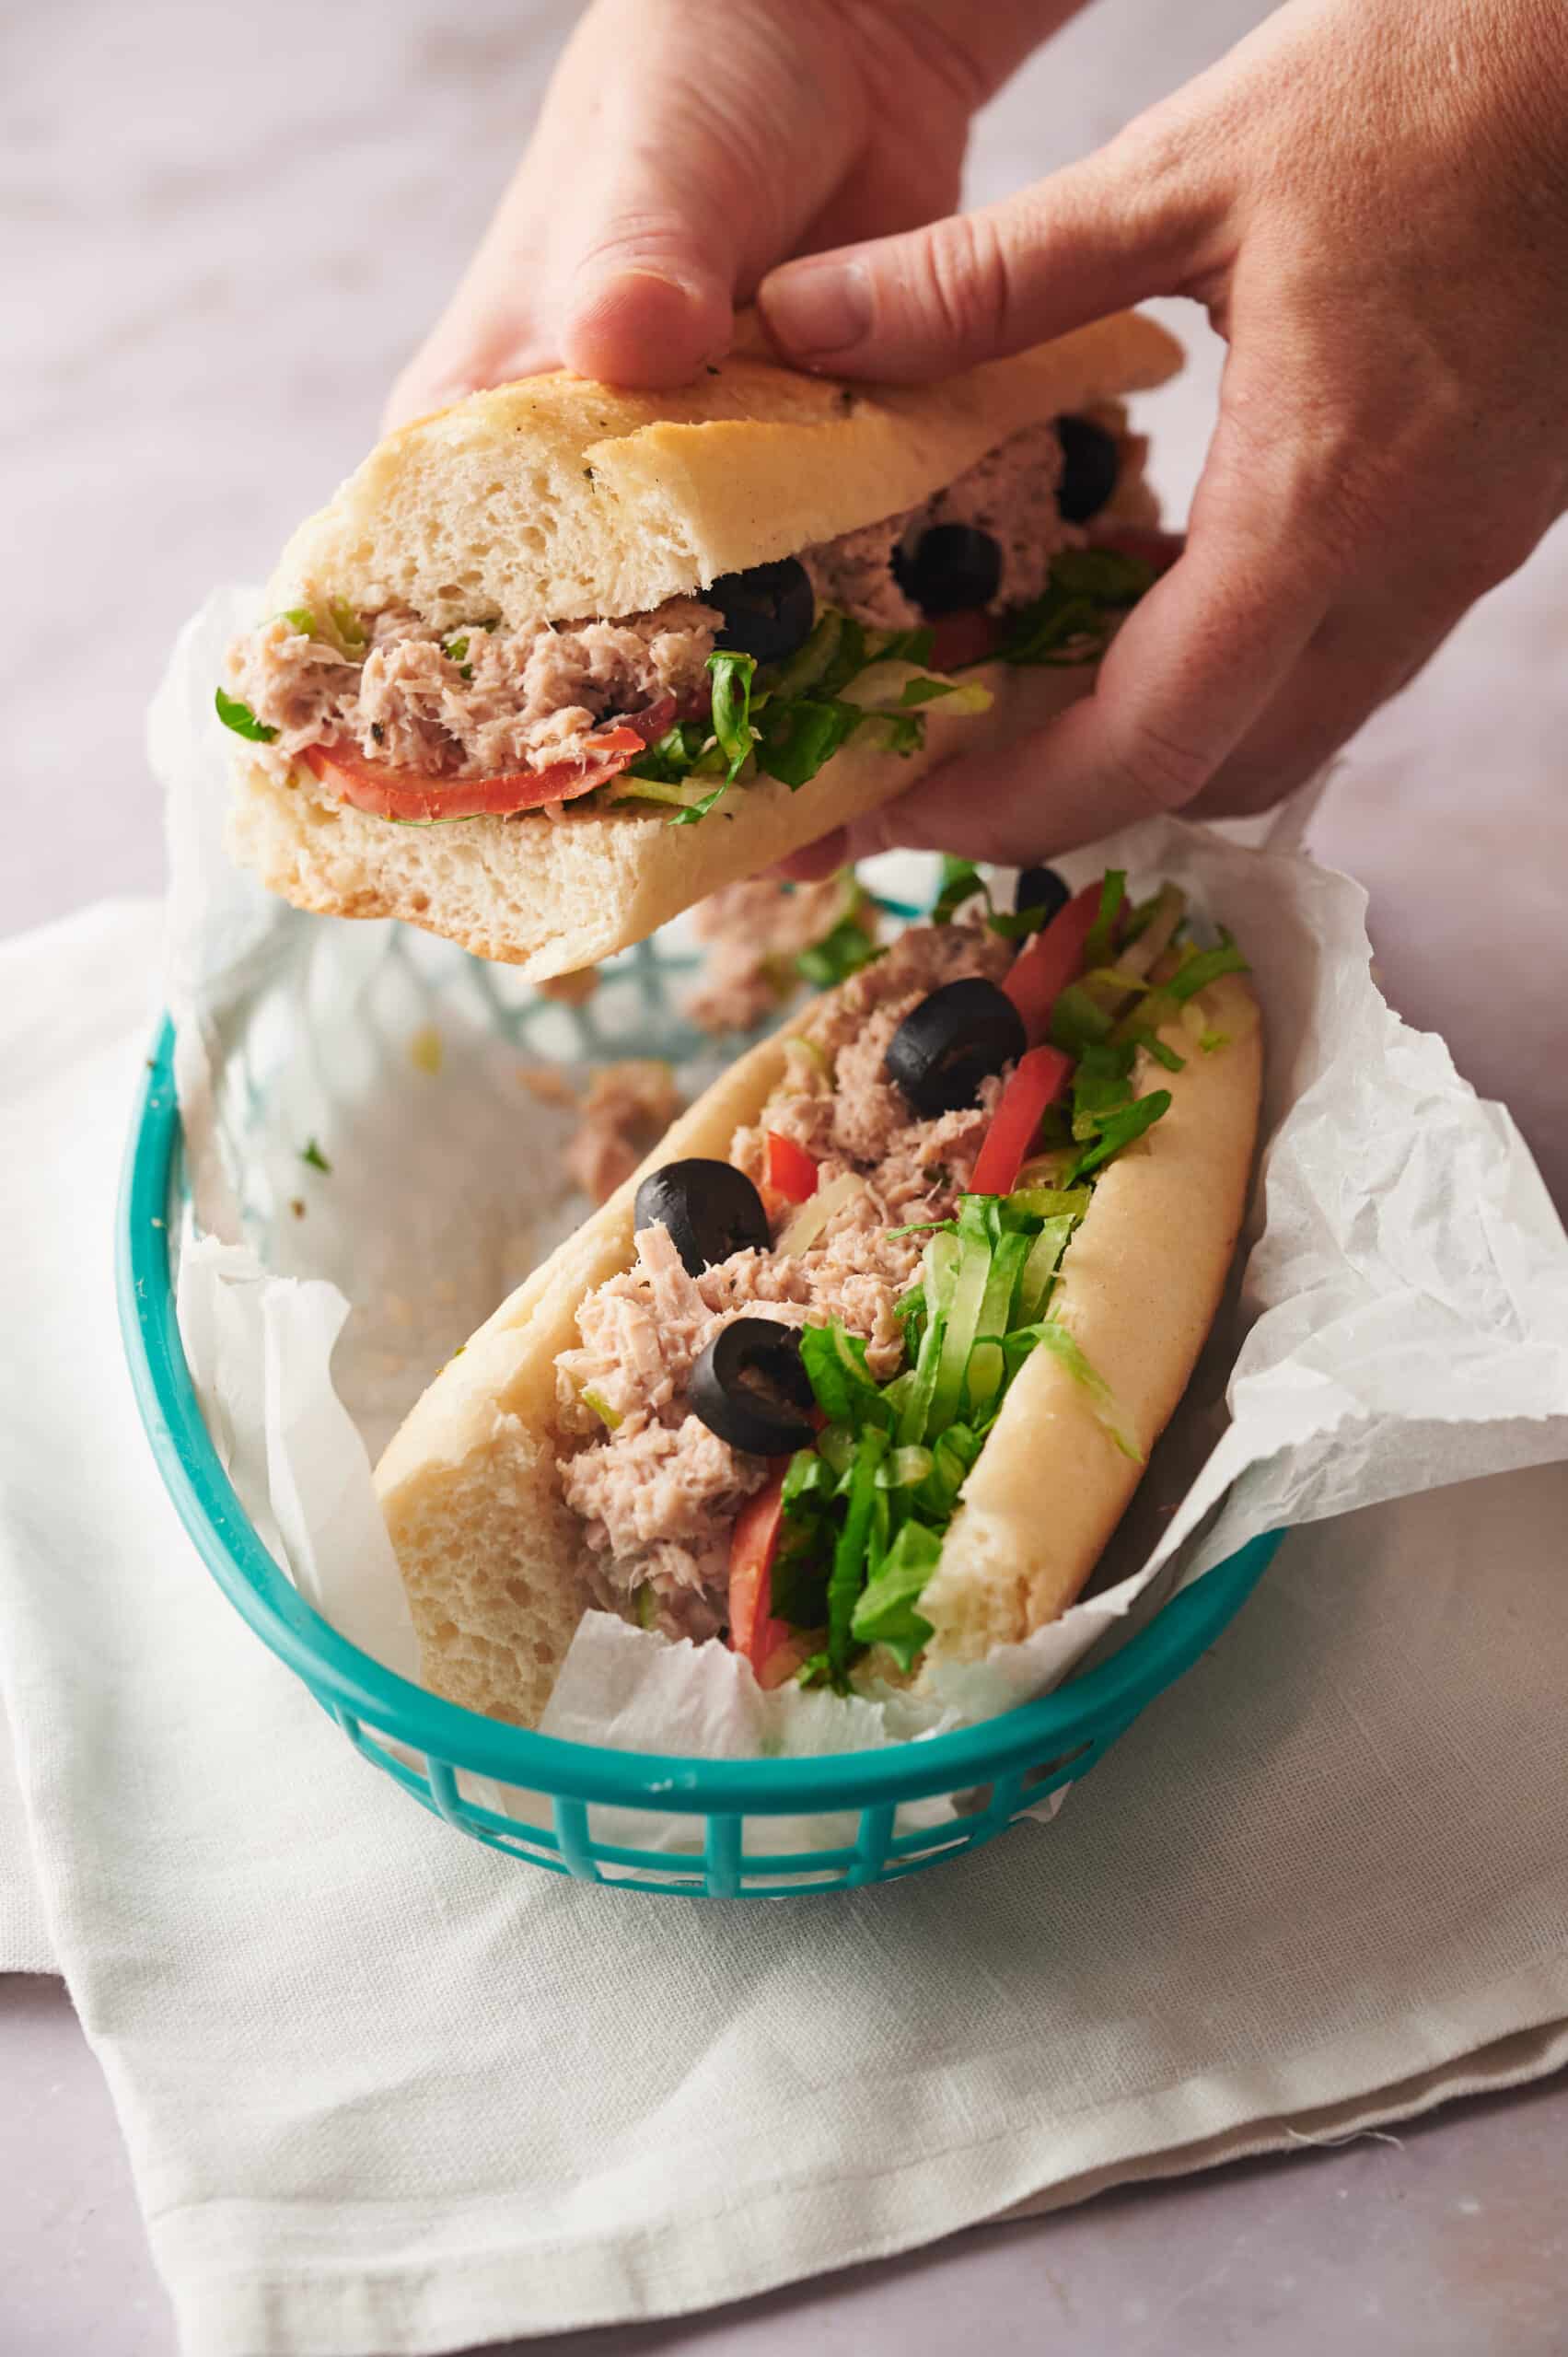 Two hands holding one half of a tuna salad sandwich. The other half is in a blue basket lined with paper.